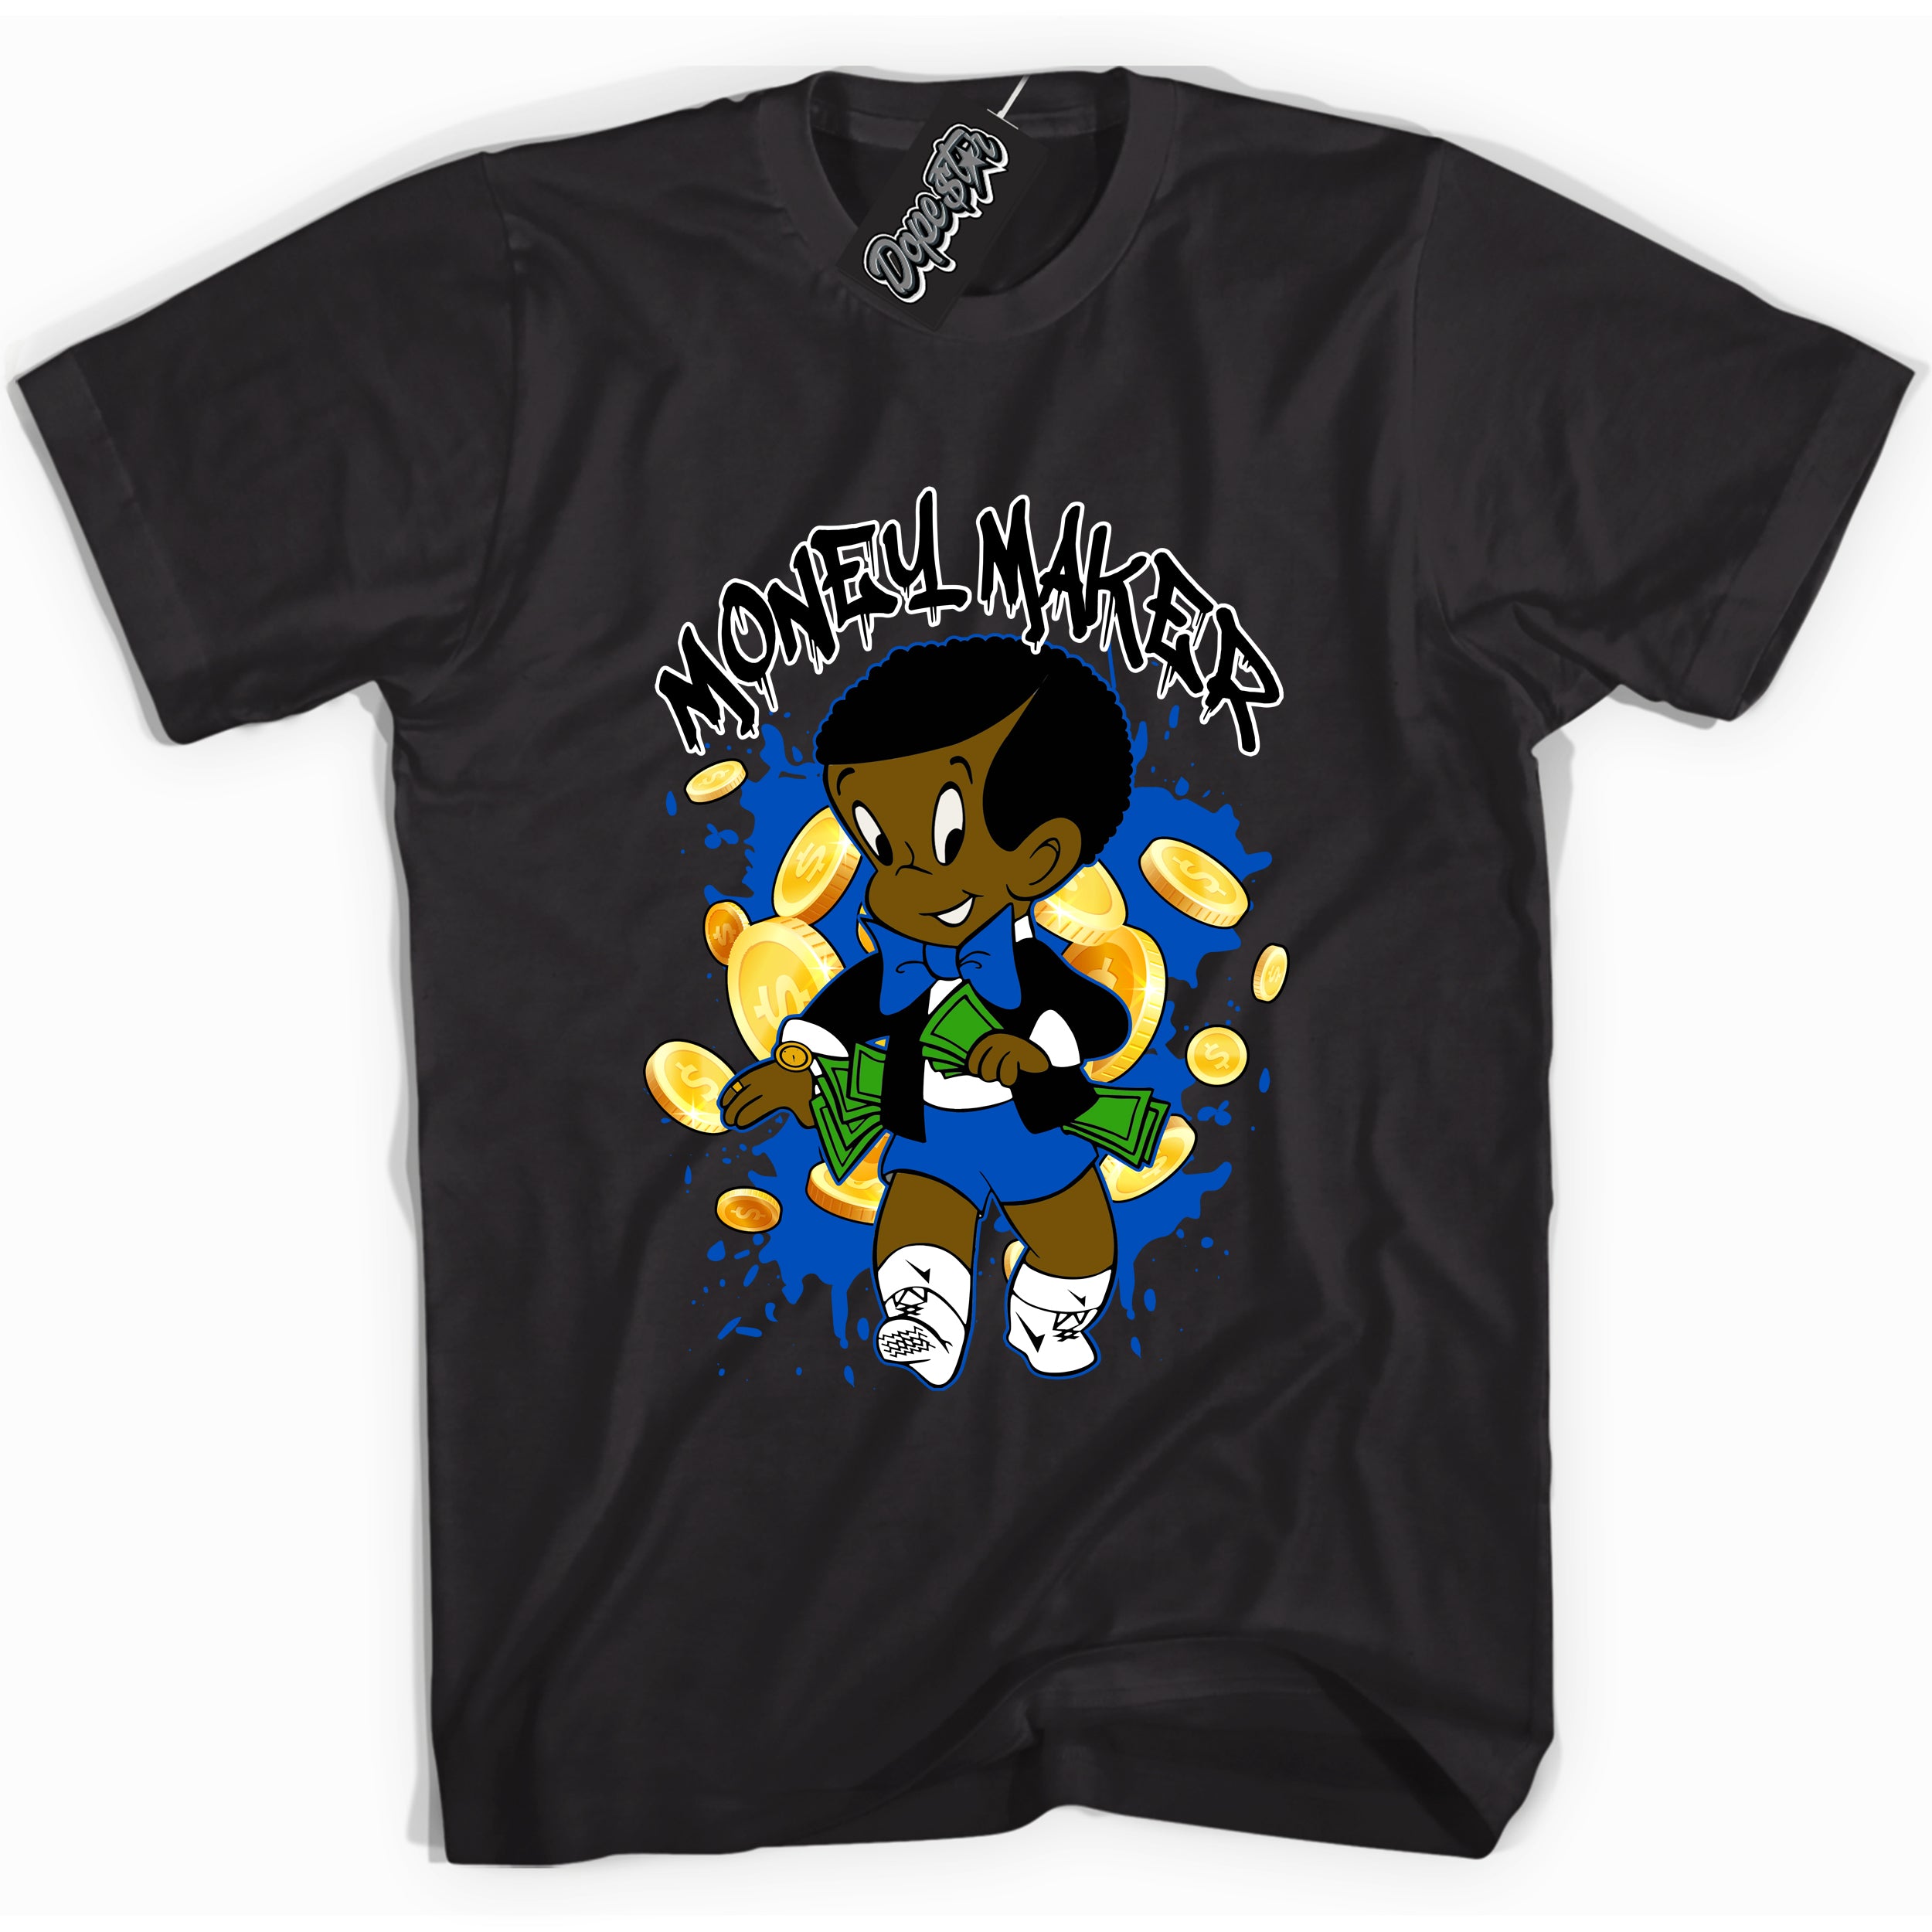 Cool Black graphic tee with "Money Maker" design, that perfectly matches Royal Reimagined 1s sneakers 